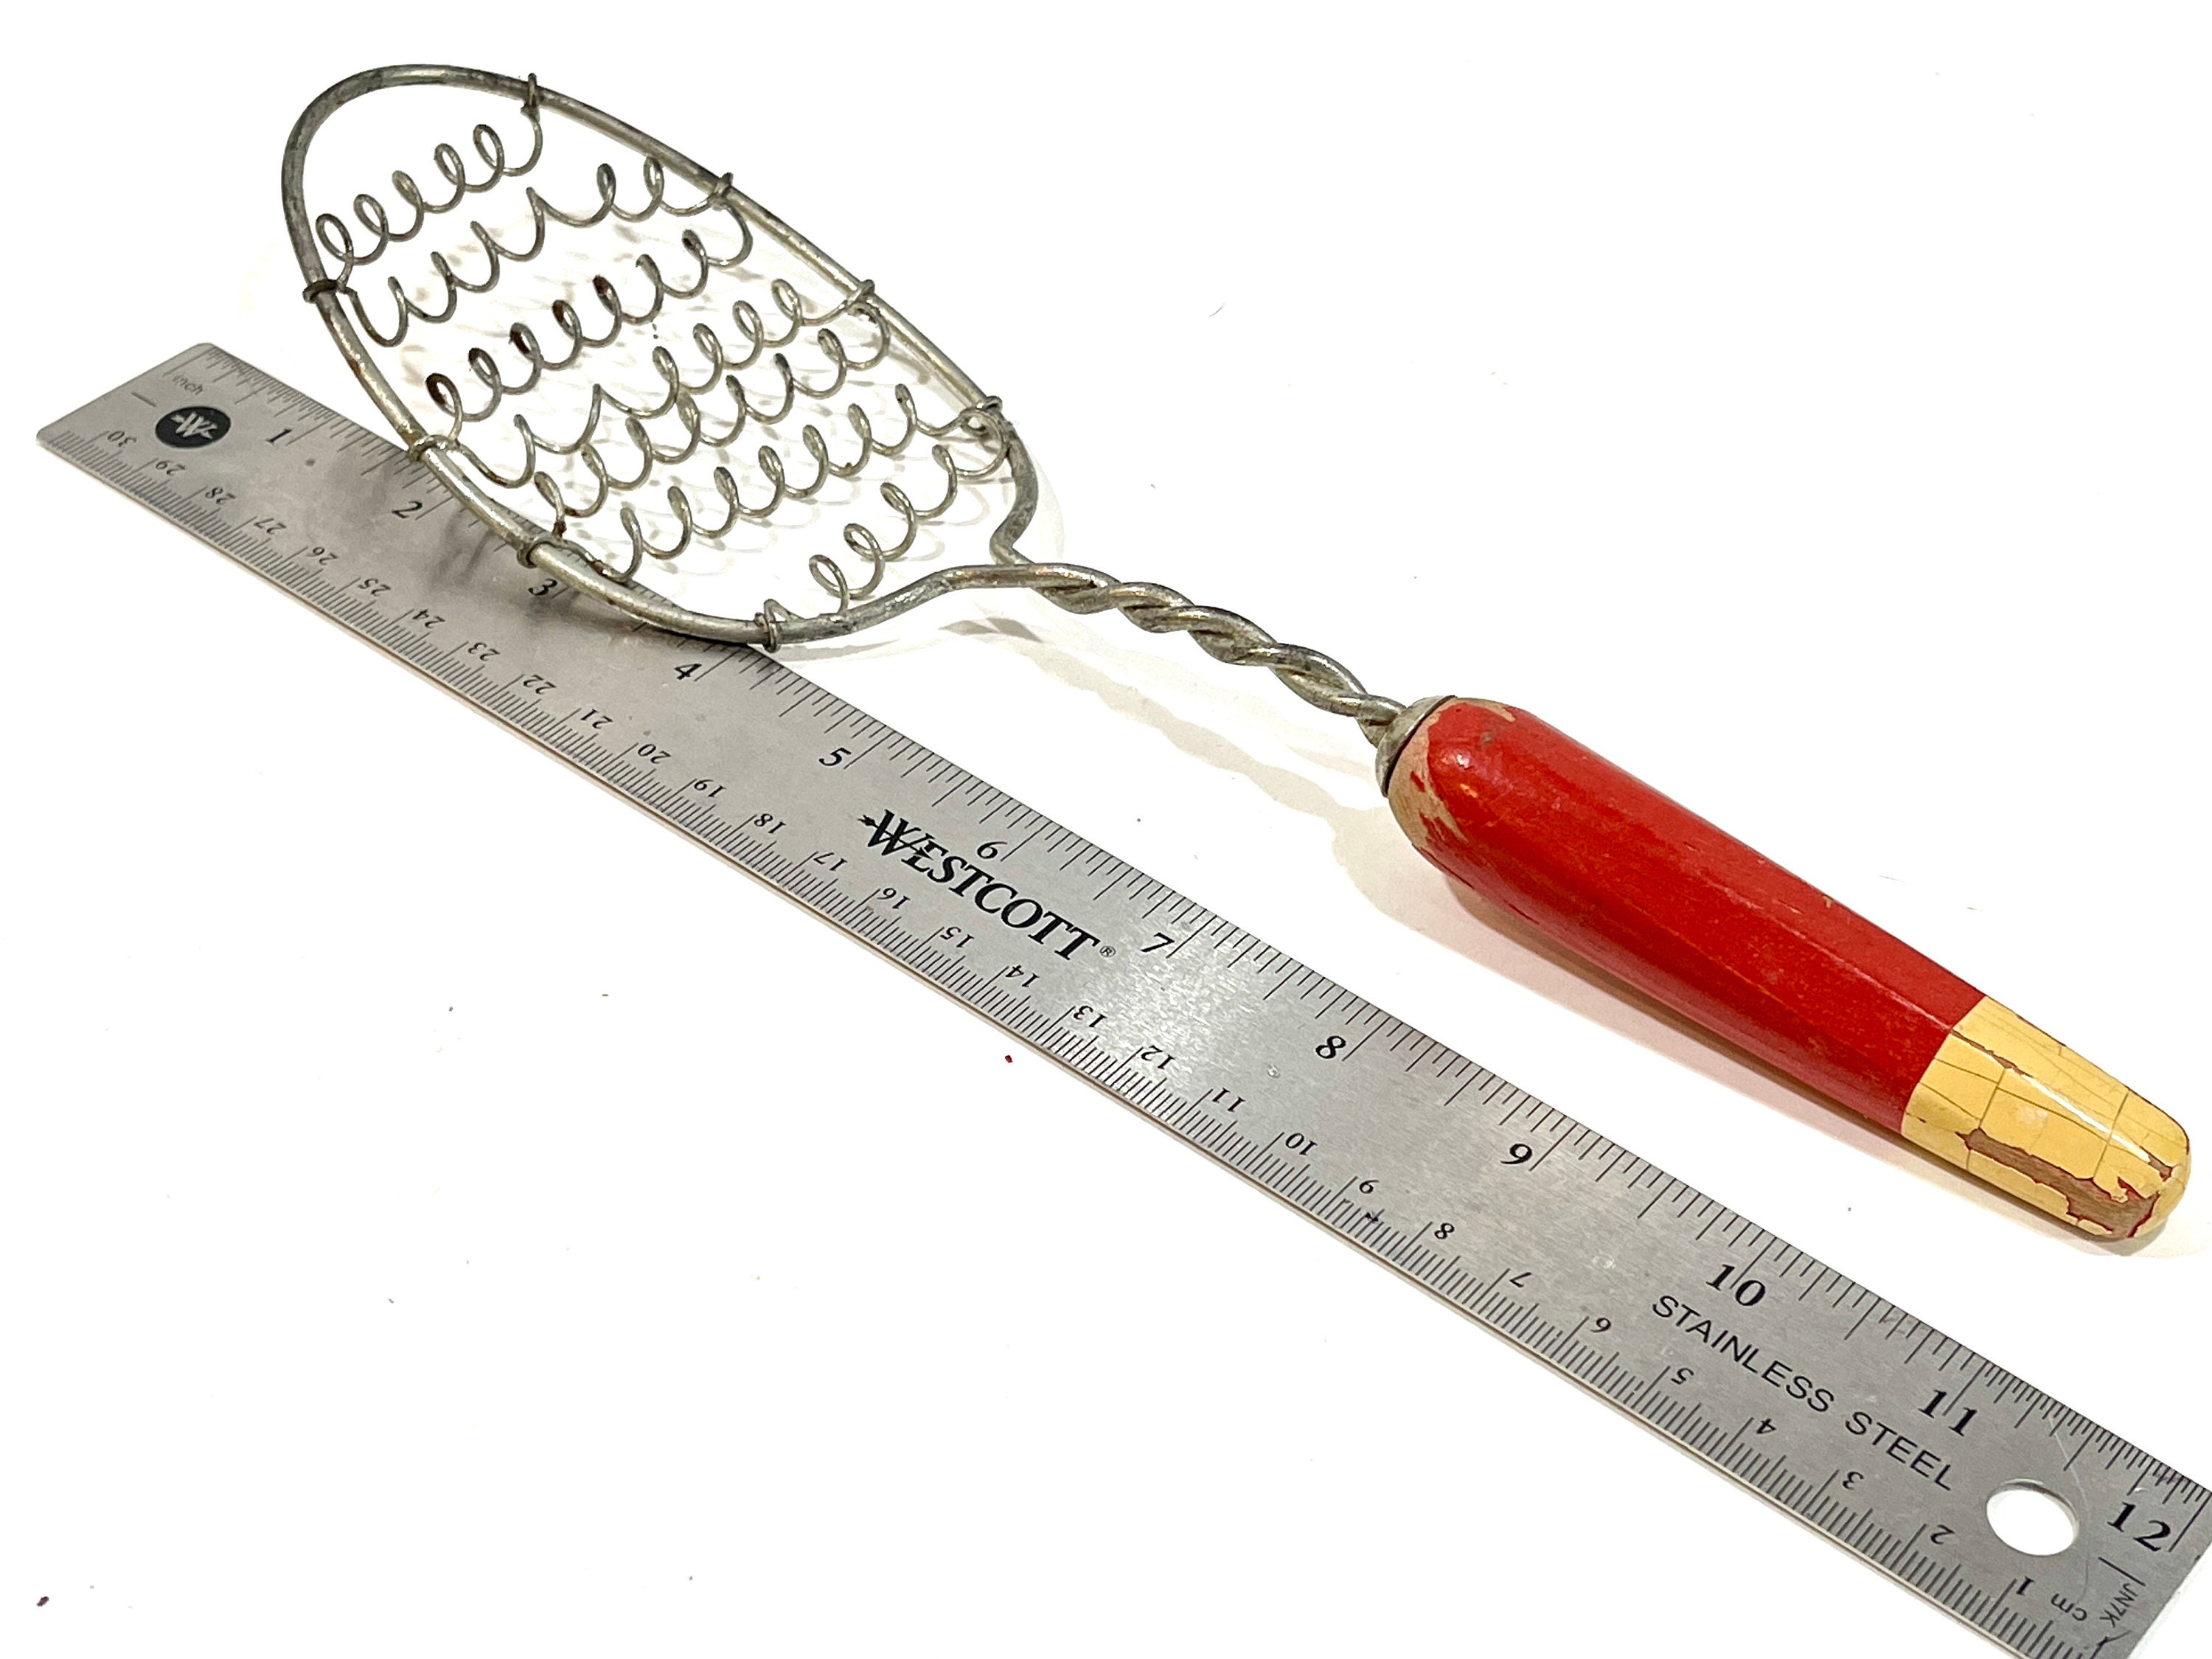 Balloon Whisk - Retro Red Wood Handle 12